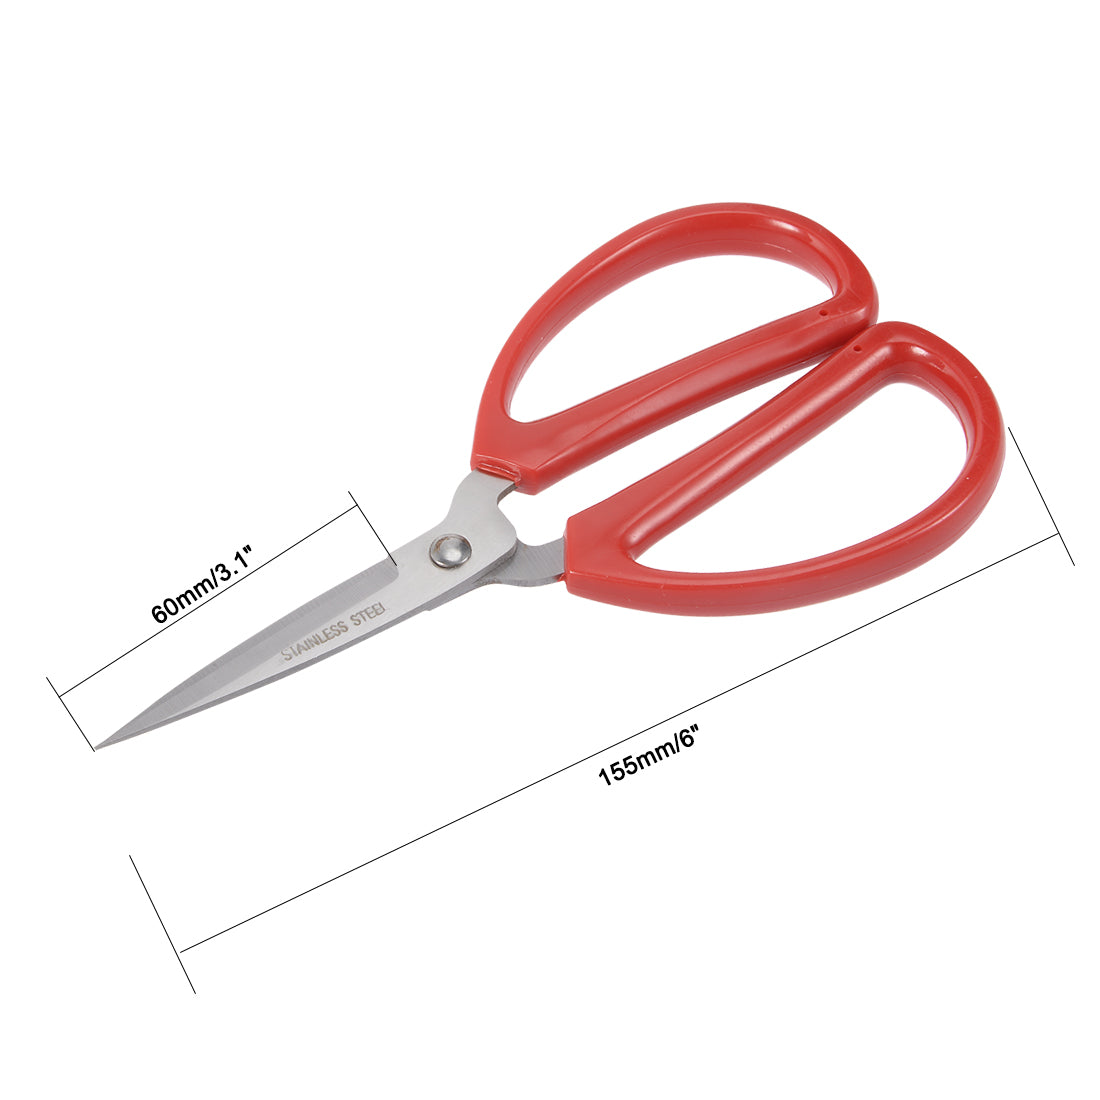 uxcell Uxcell 6 Inch Stainless Steel Scissor for Office Home Cutting, Straight Red Handle